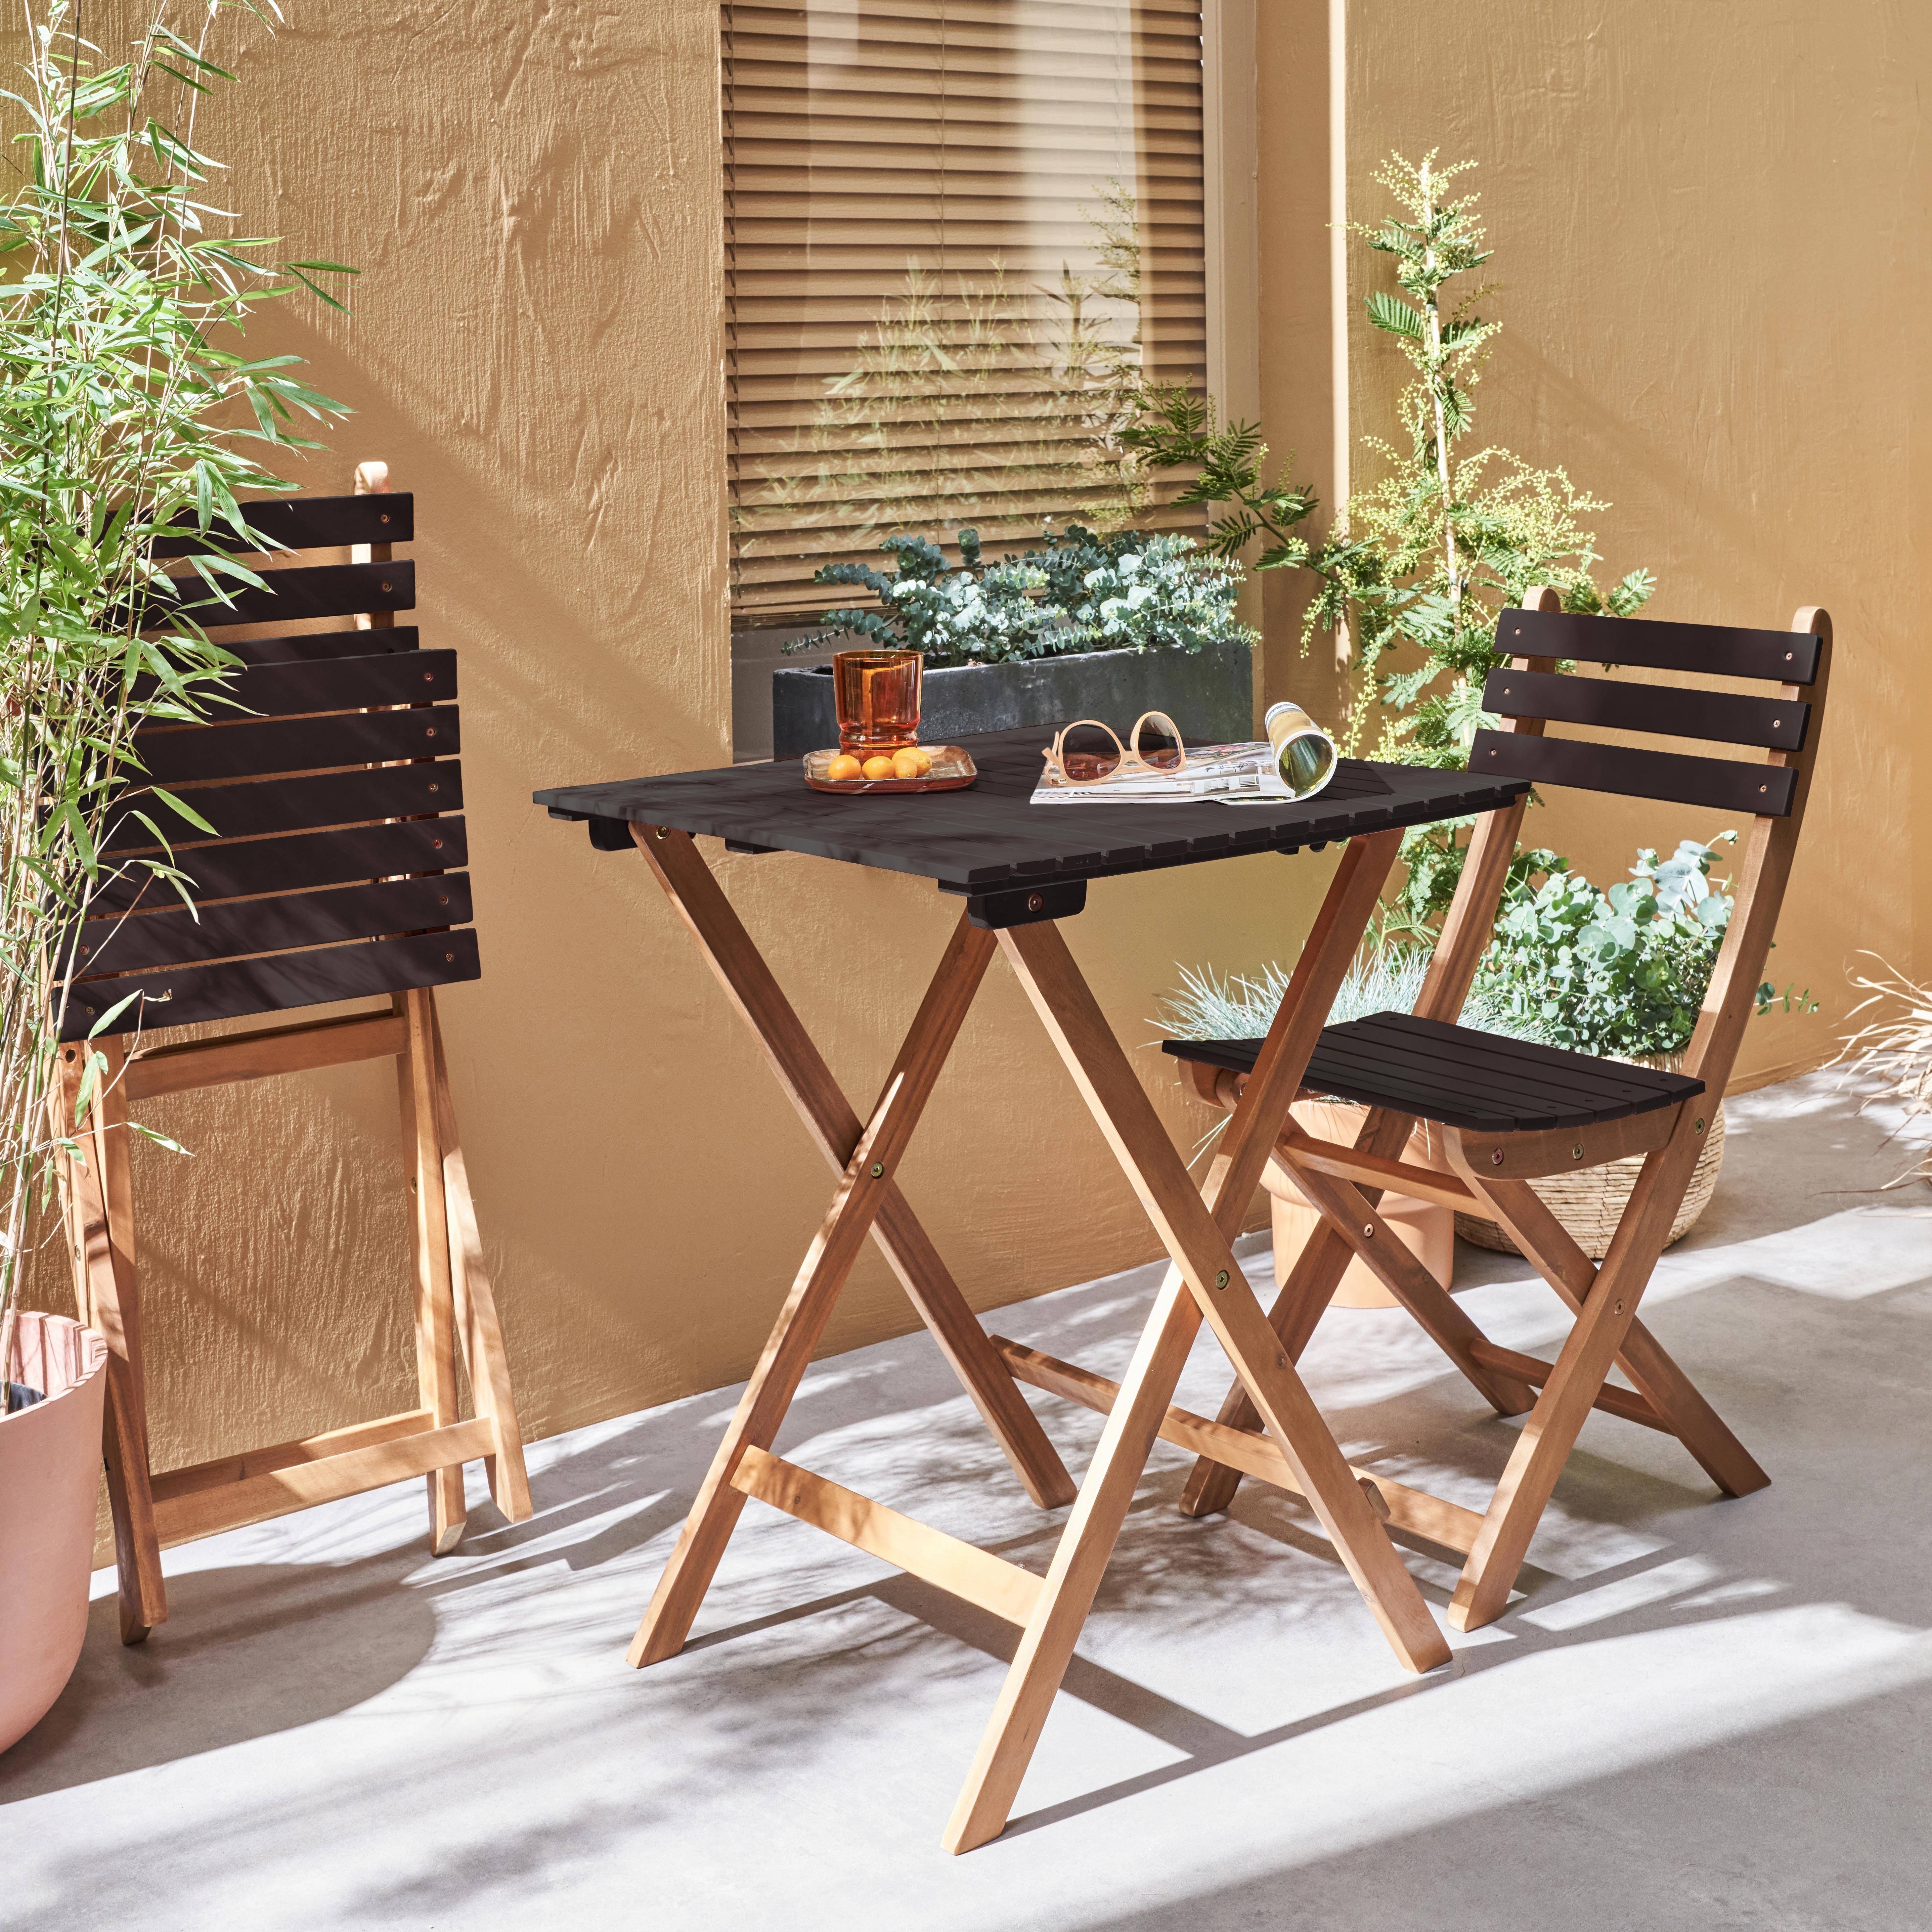 2-seater foldable wooden bistro garden table with chairs, 60x60cm - Barcelona - Black,sweeek,Photo2